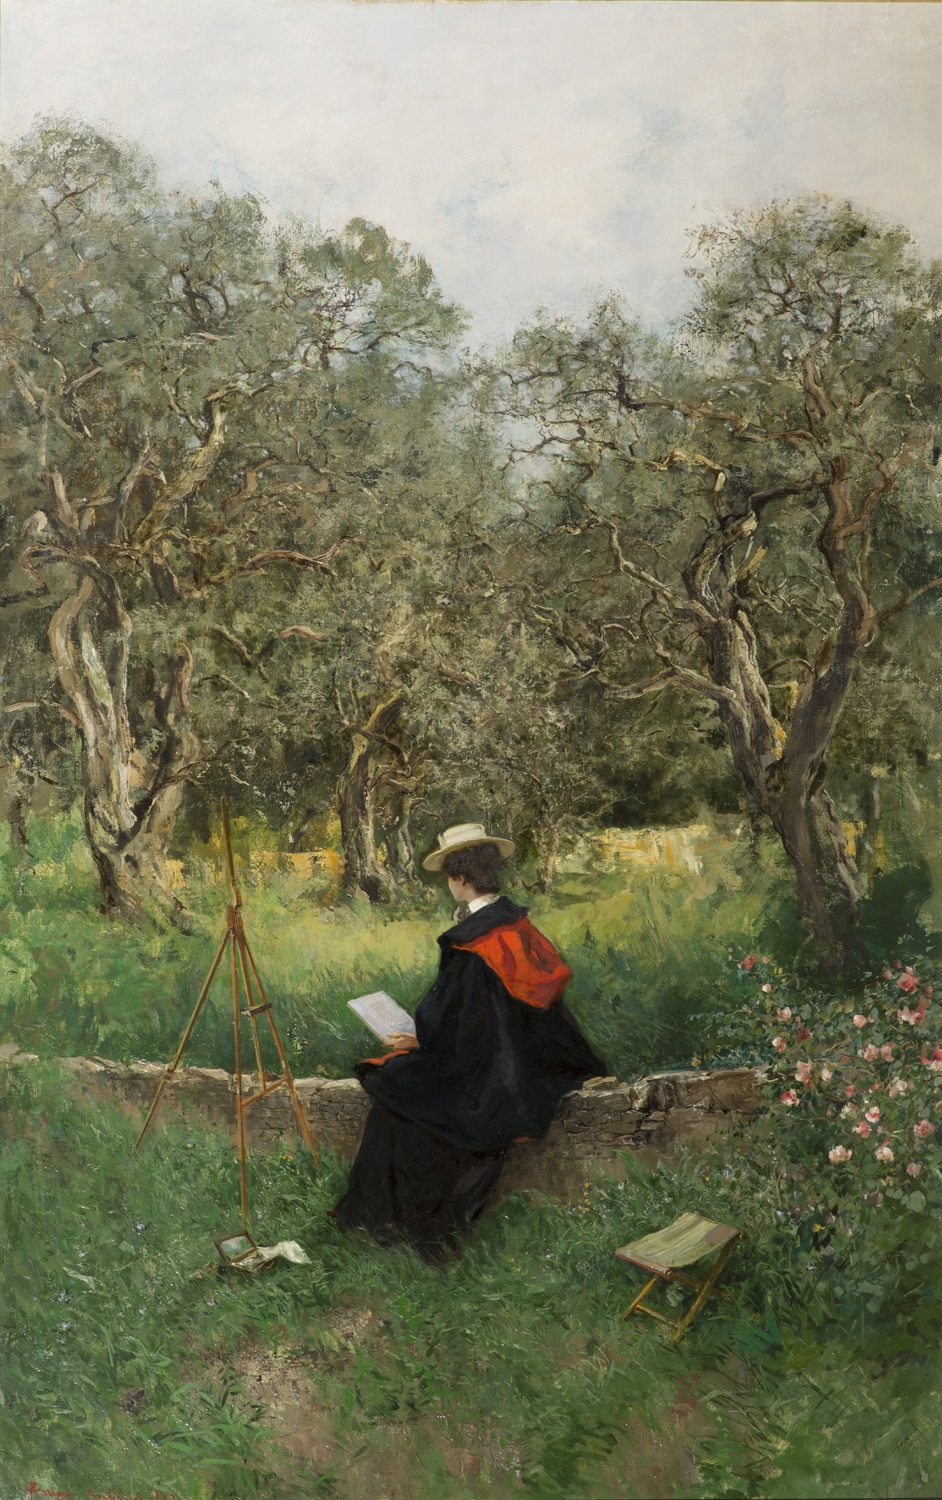 Under the olive trees, Pompeo Mariani, Civic Gallery of Modern Art, Genoa